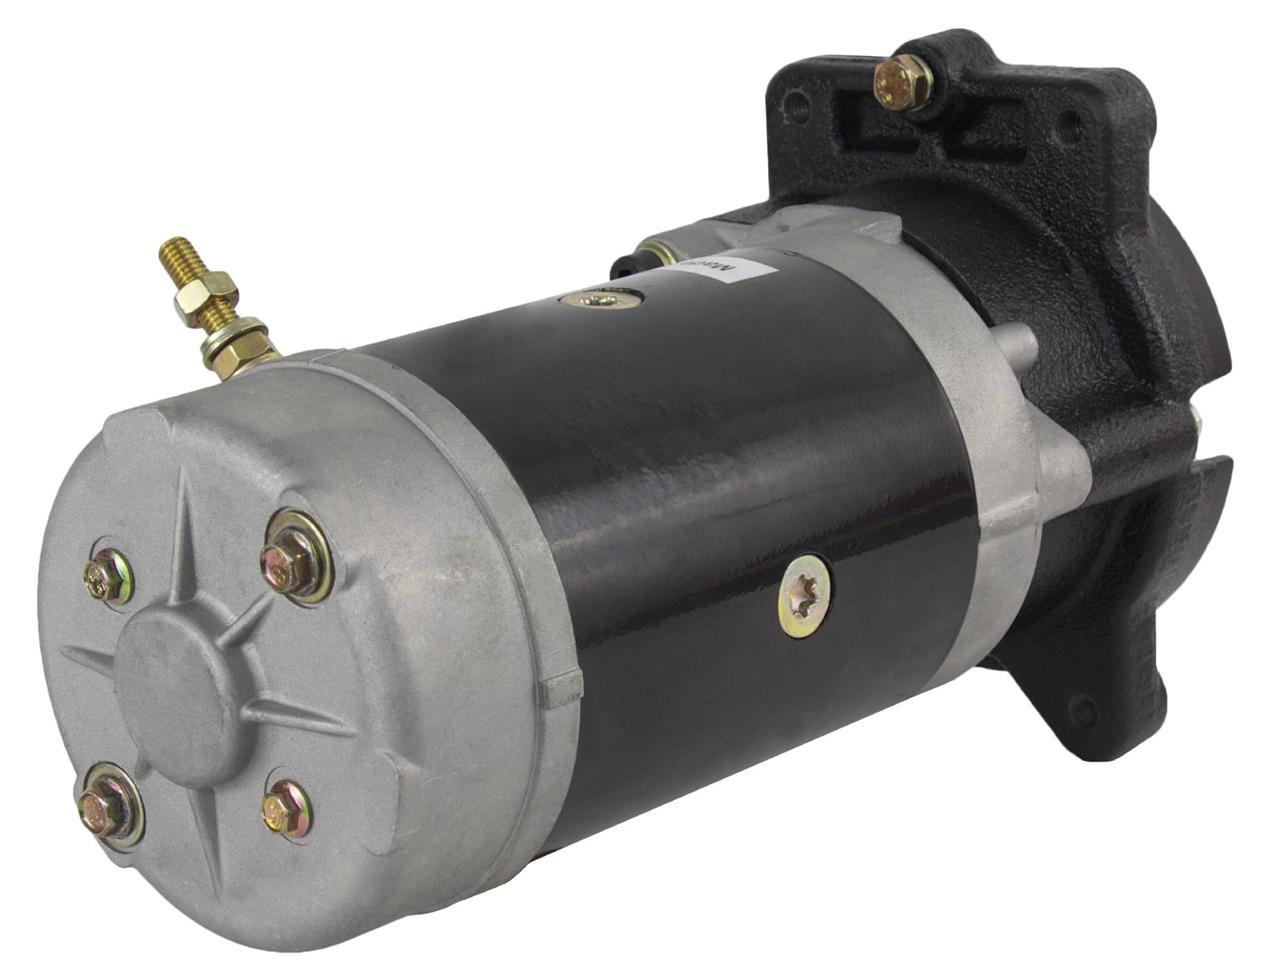 Rareelectrical 24V POWER STEERING PUMP MOTOR COMPATIBLE WITH KOMATSU ARTICULATED DUMP TRUCK HM300-2 HM300-2R 421-623-2700 0-51000-3040,